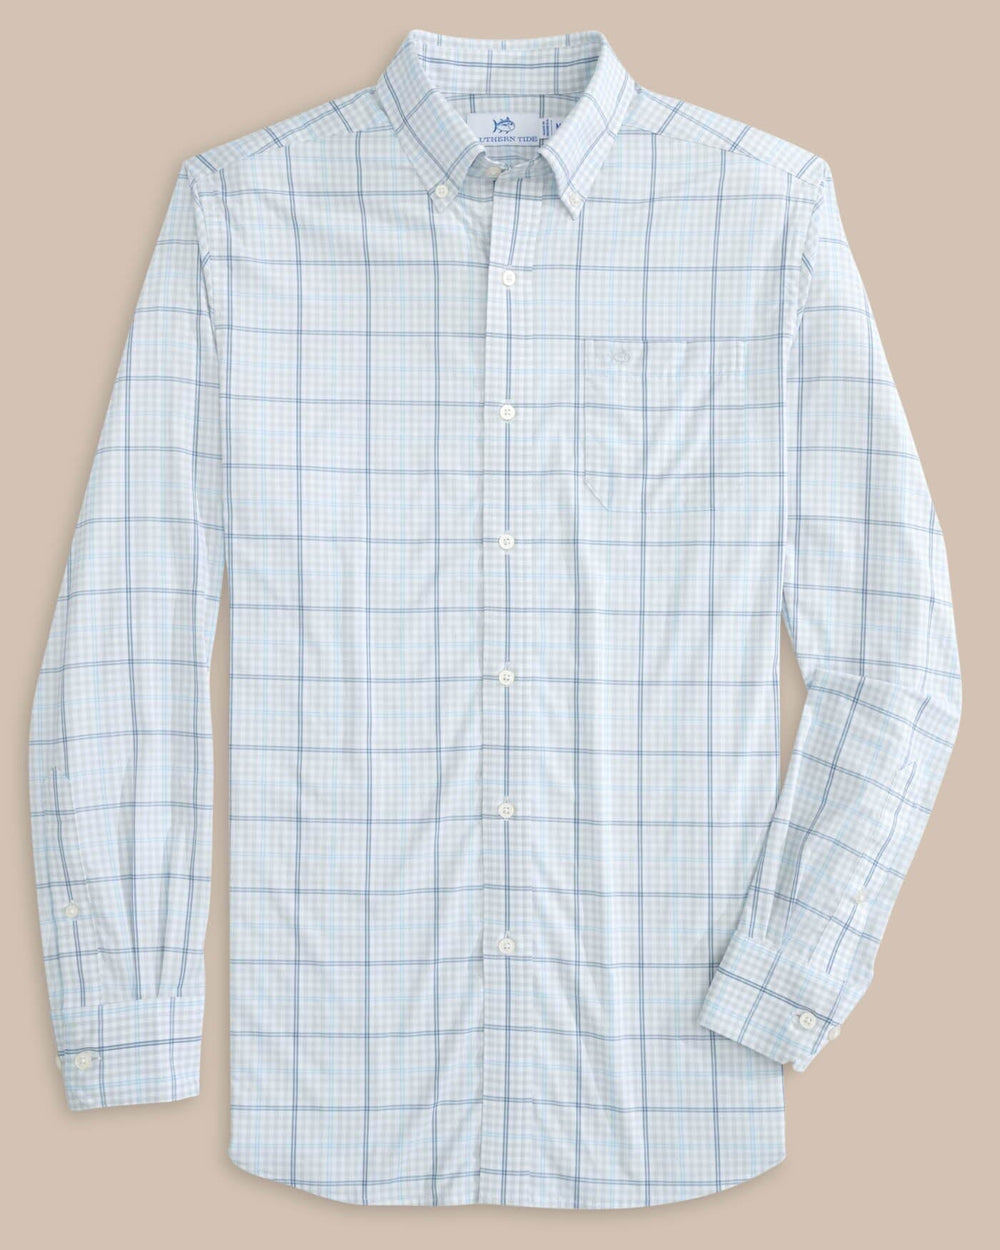 The front view of the Southern Tide brrr Intercoastal Rainer Check Long Sleeve Sportshirt by Southern Tide - Platinum Grey